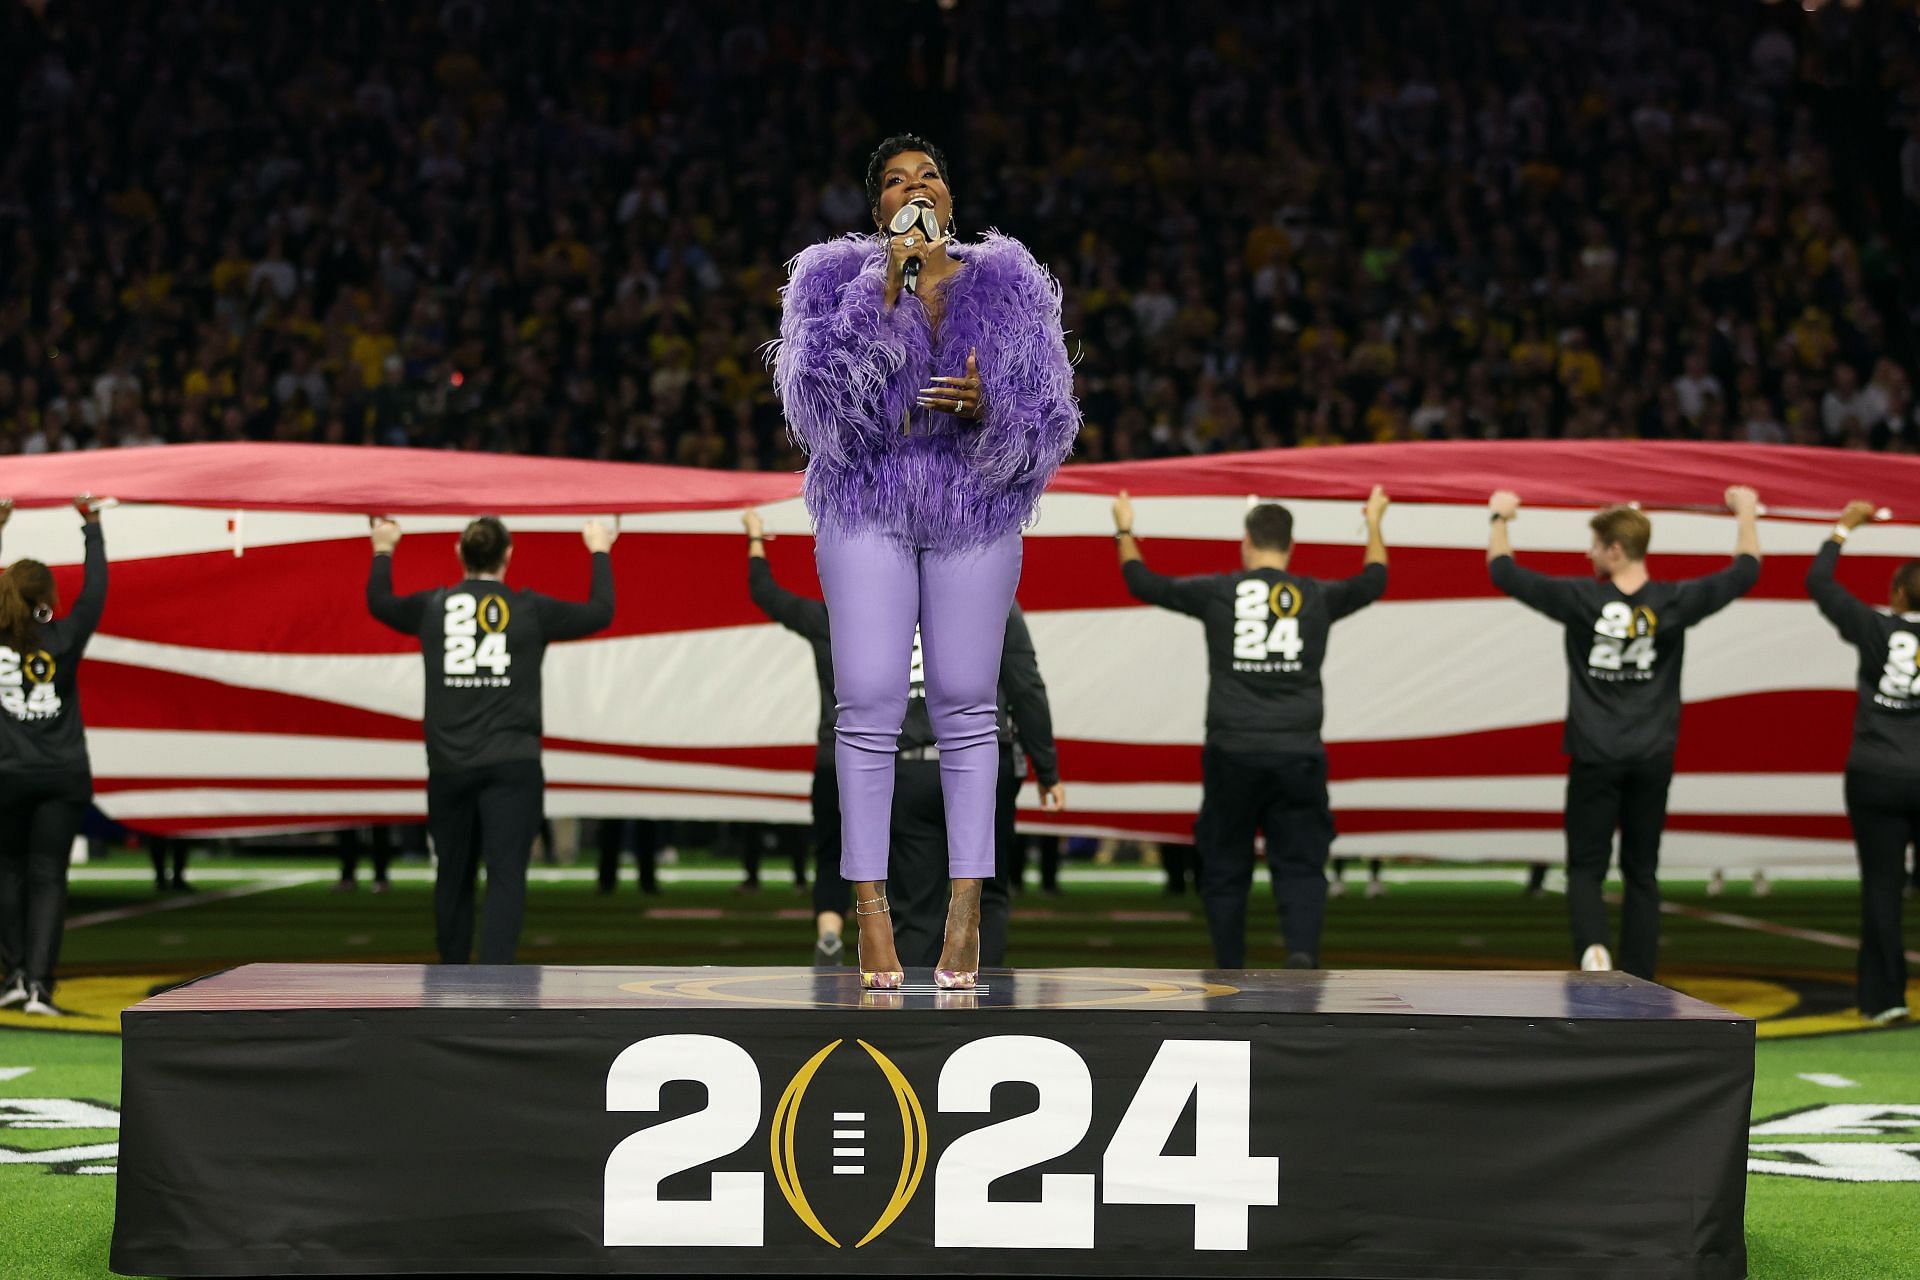 Who sang the national anthem at the CFP national championship today